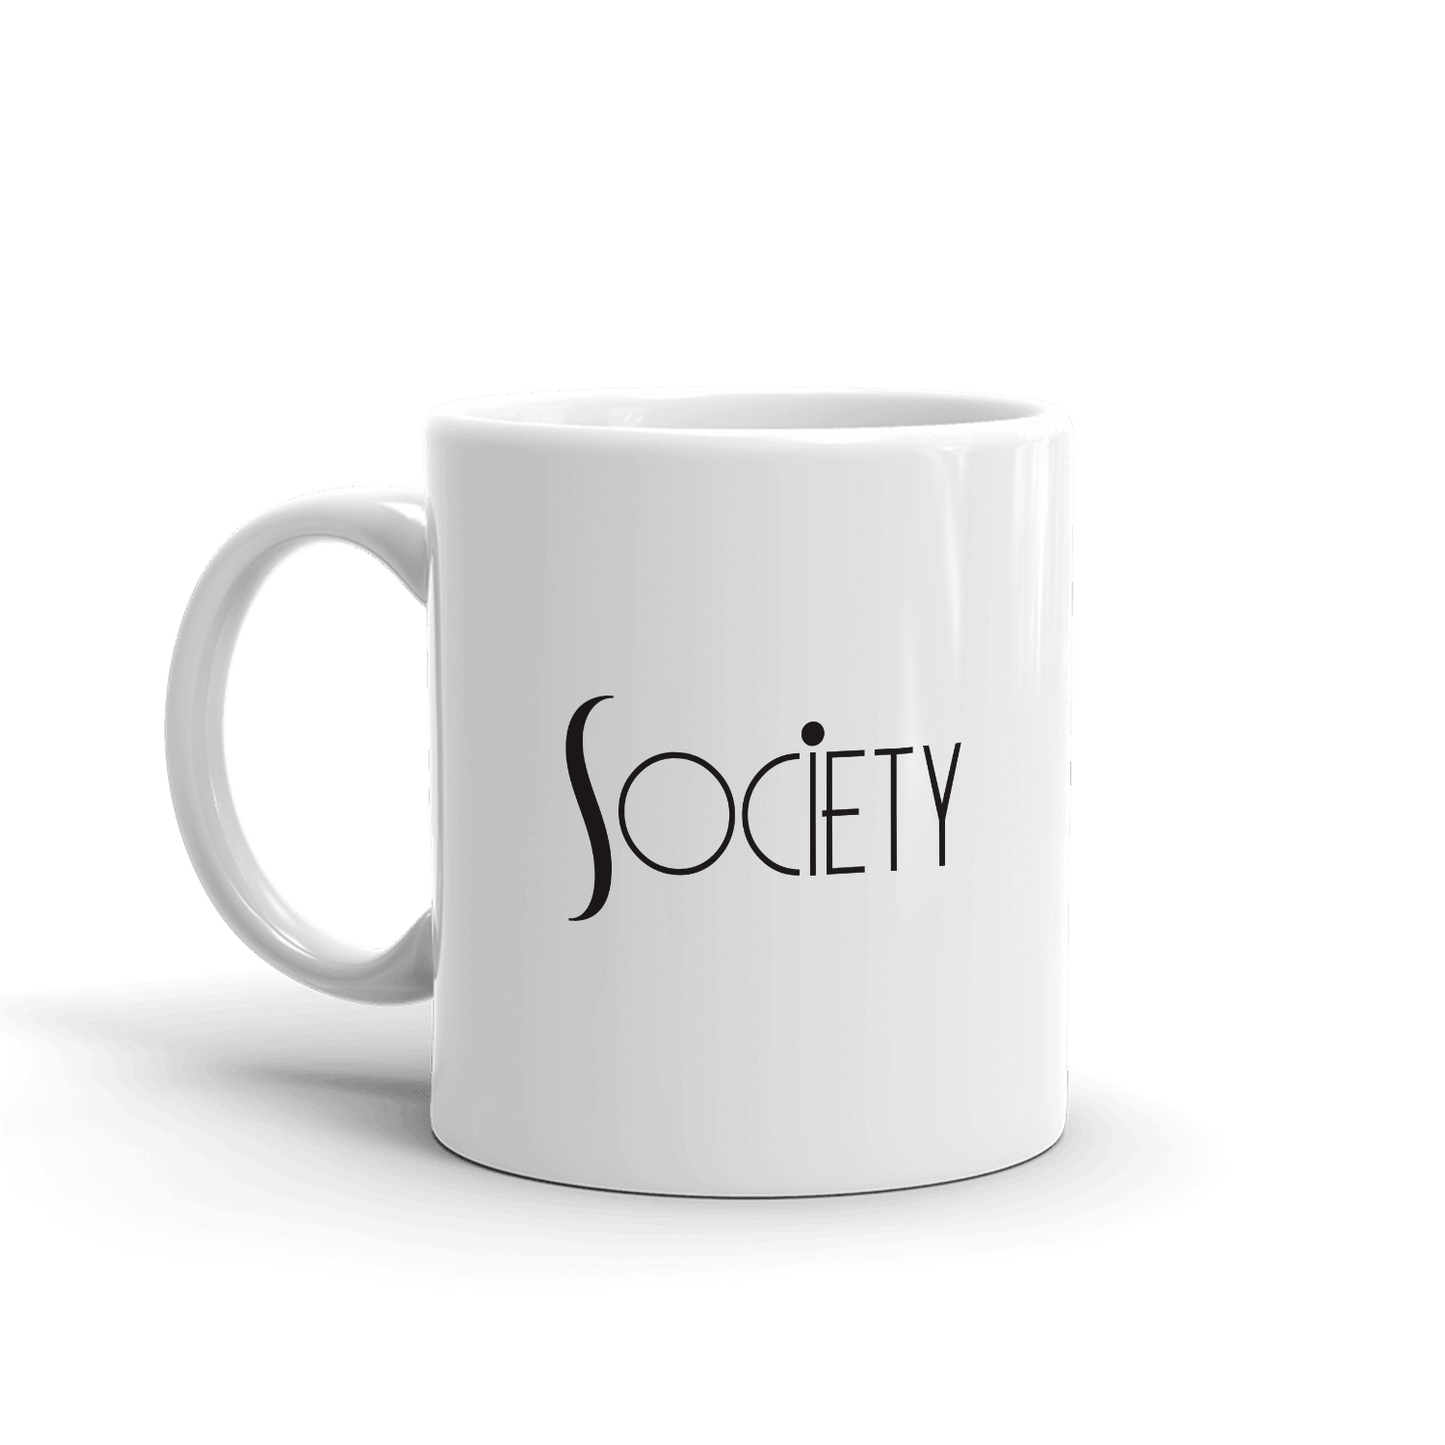 The Young and the Restless Society White Mug - Paramount Shop